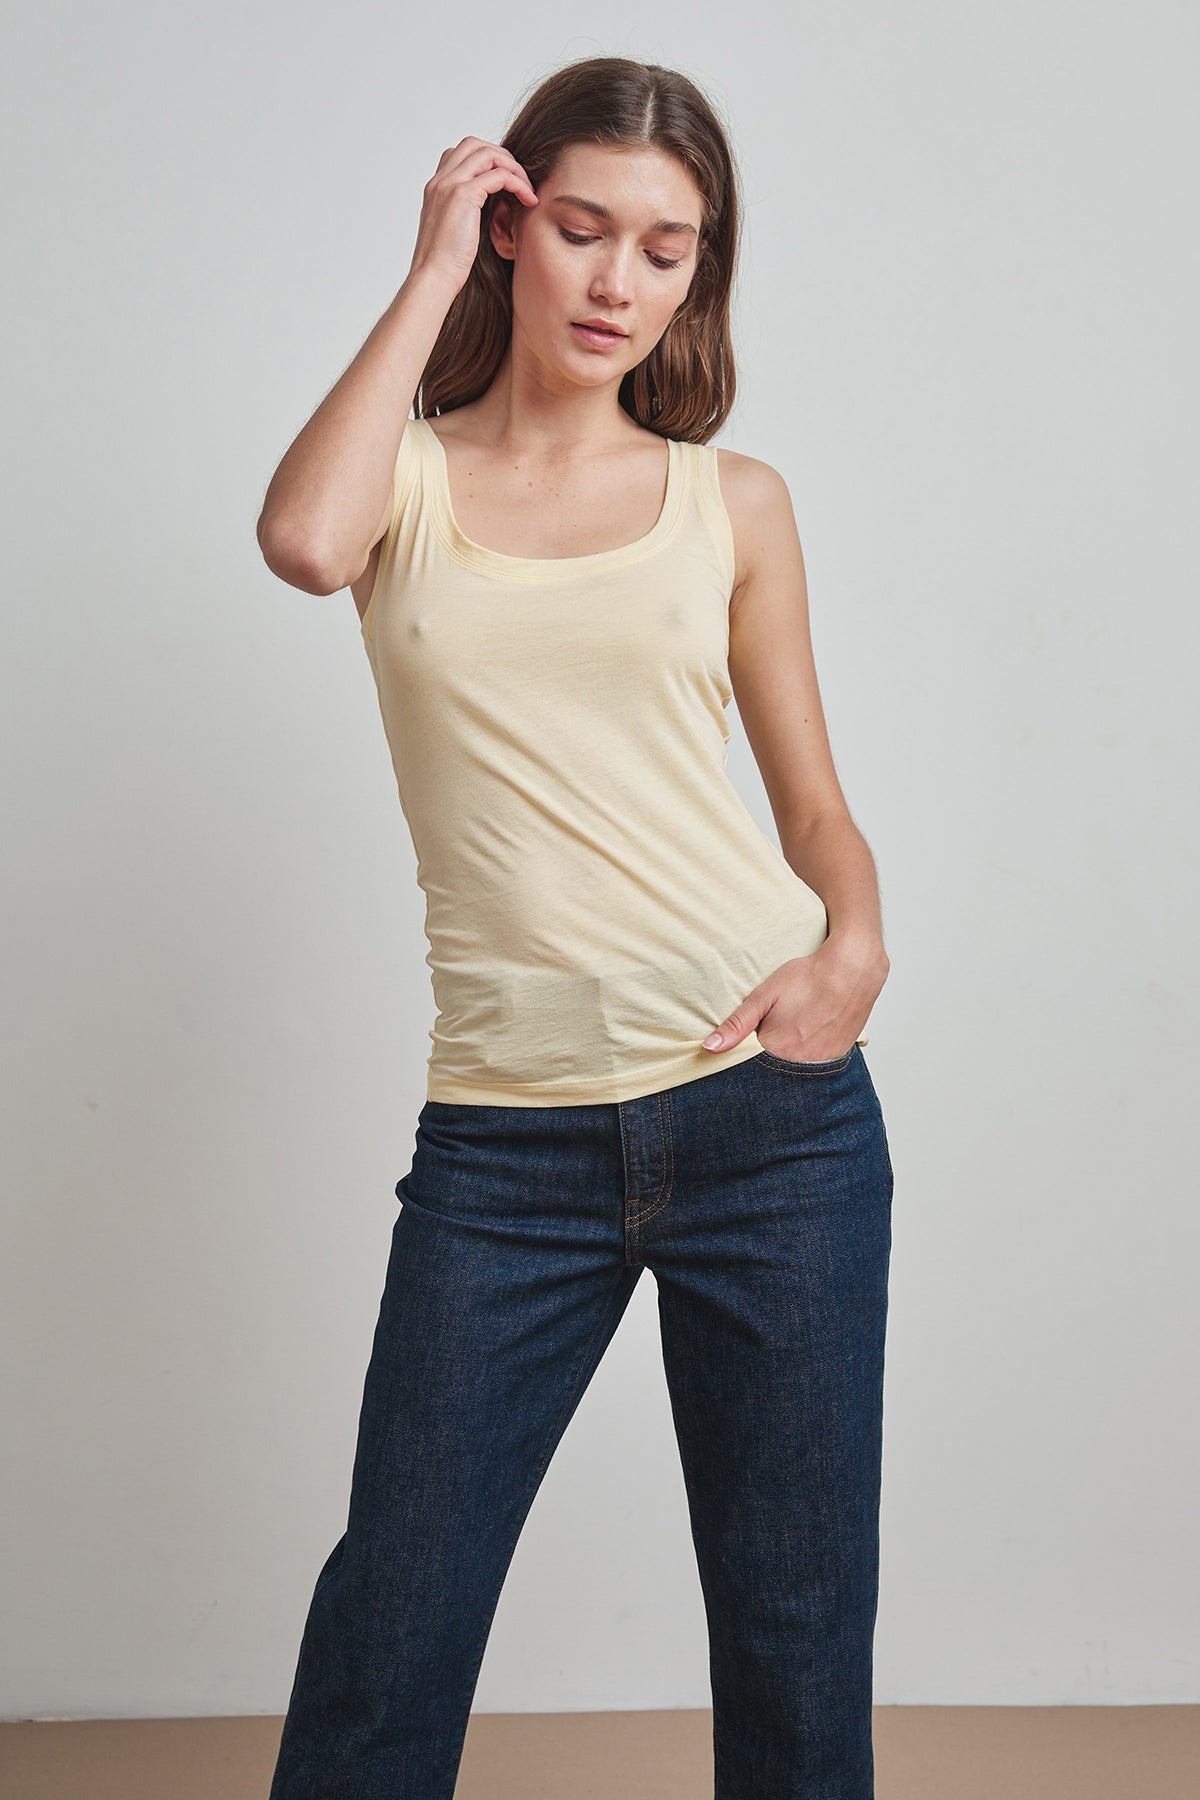   A woman wearing a MOSSY GAUZY WHISPER FITTED TANK in yellow by Velvet by Graham & Spencer for warmer days. 